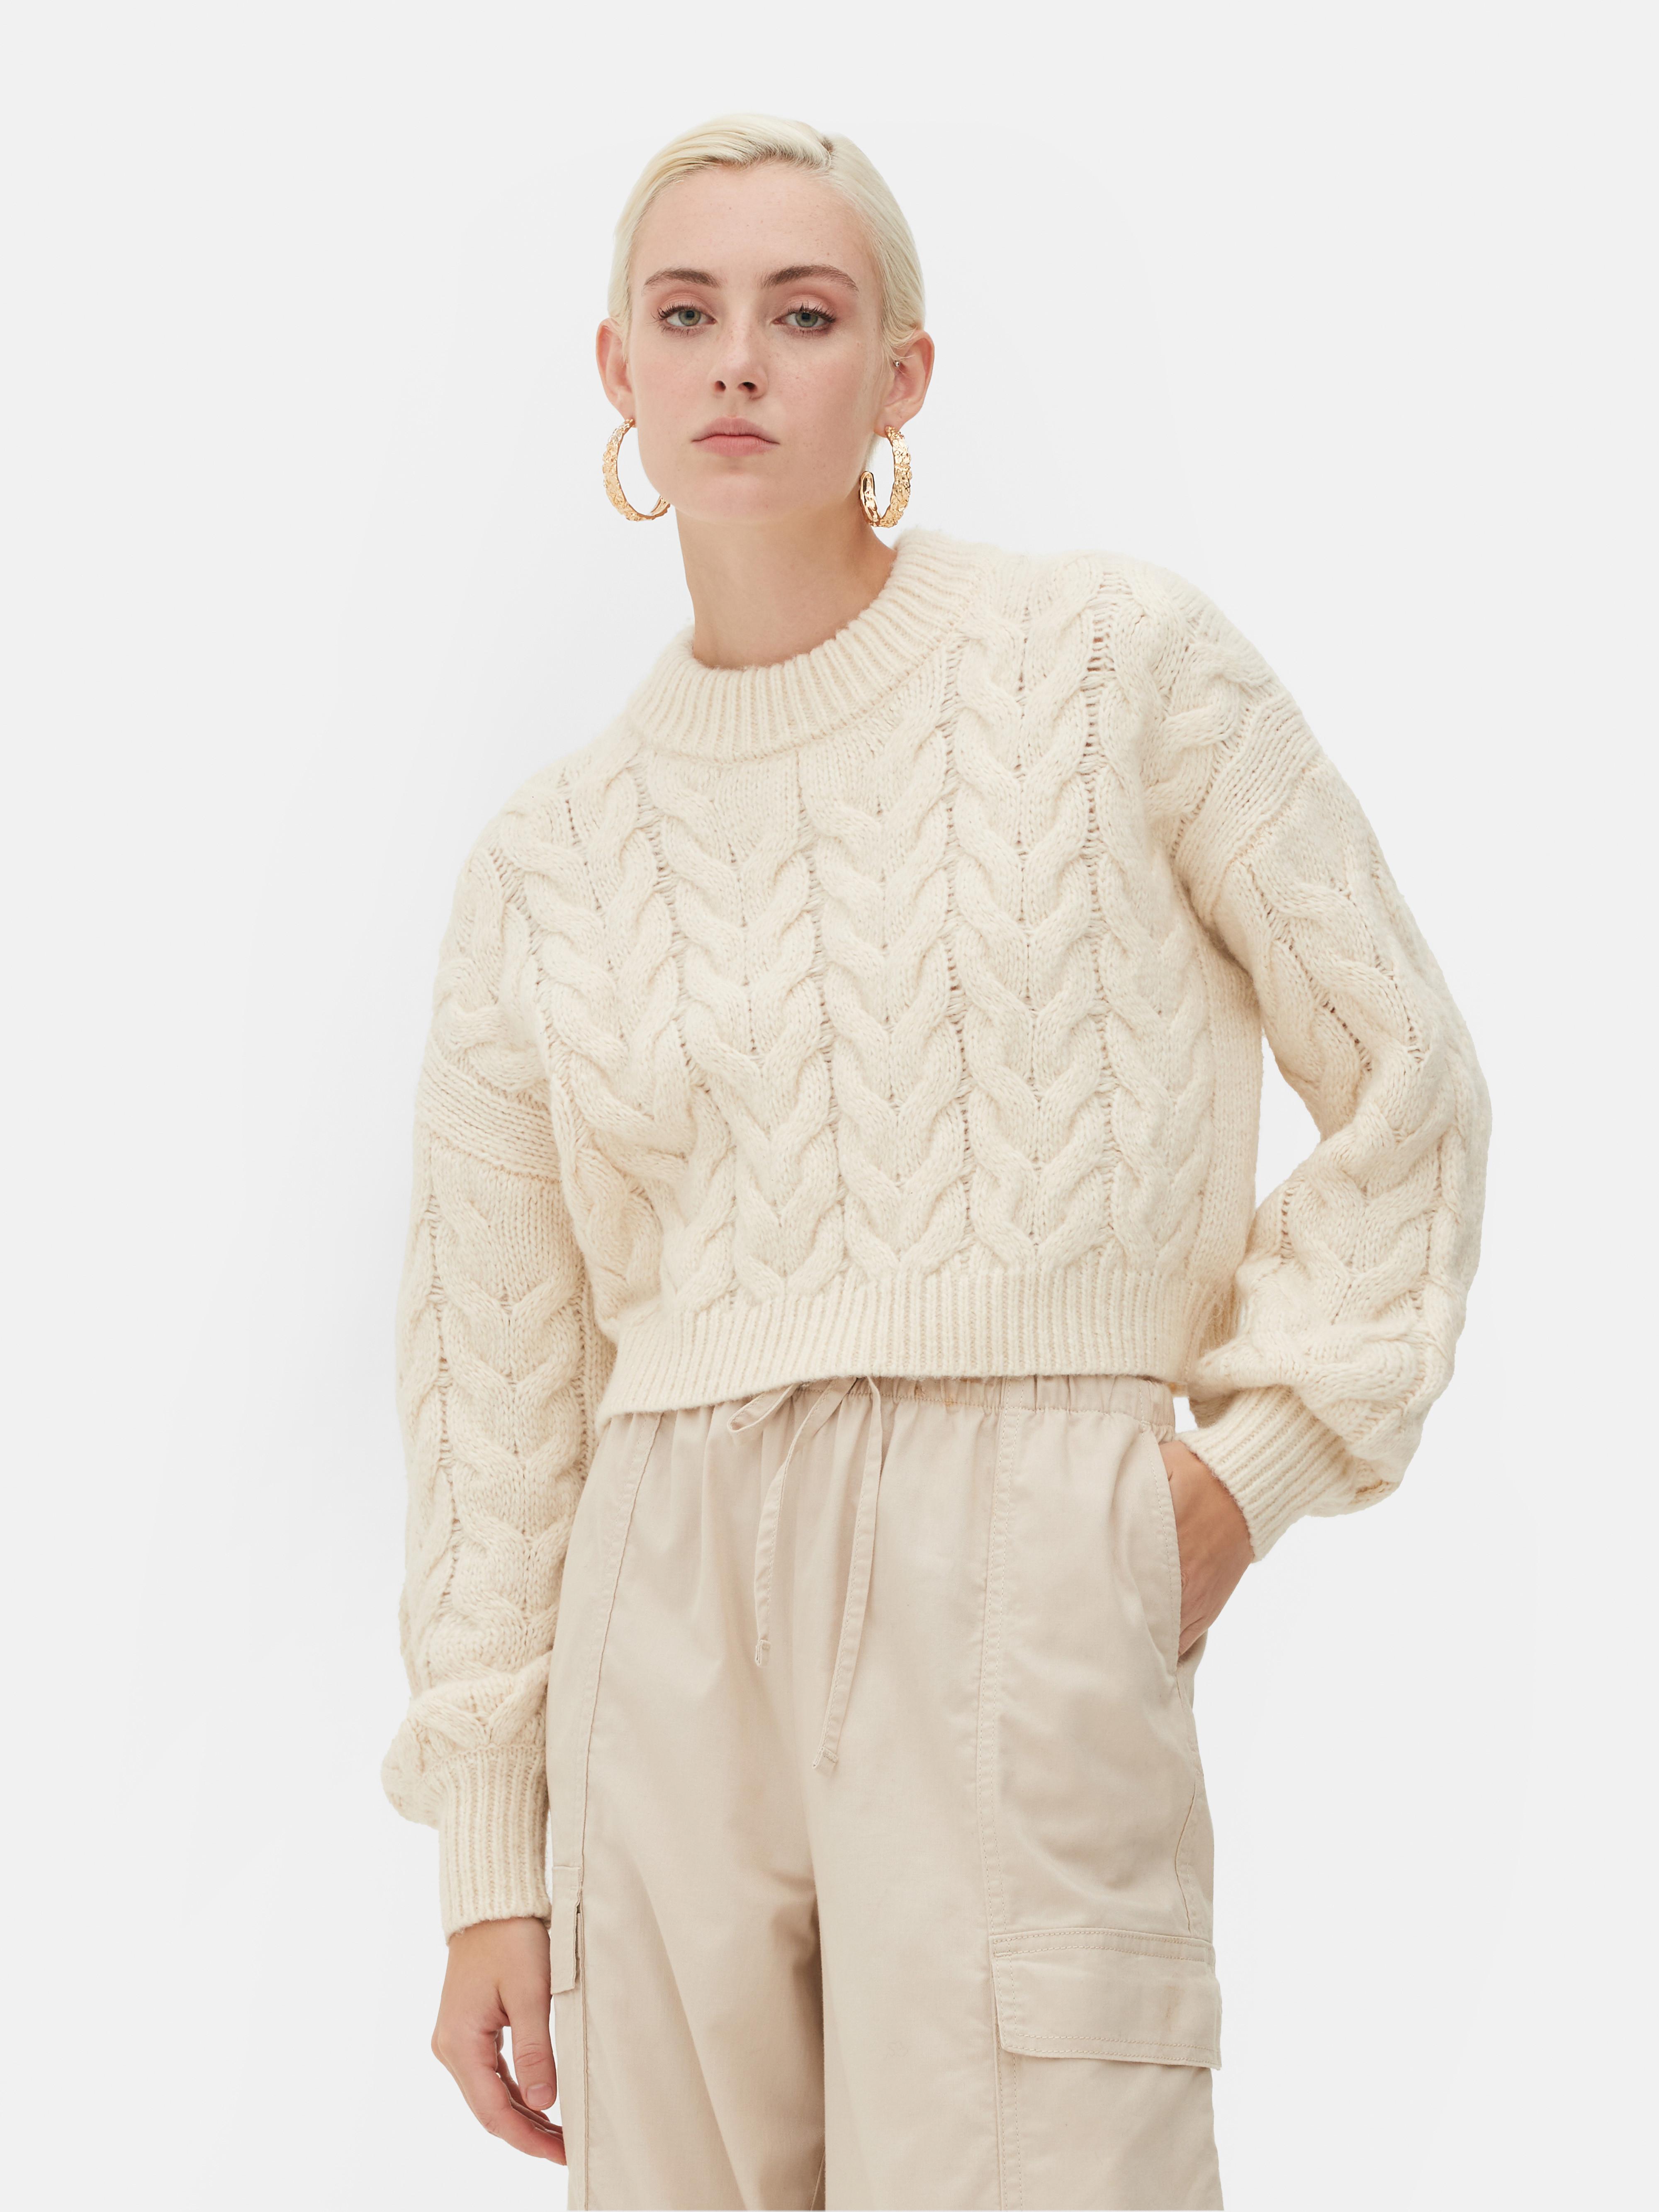 Rita Ora Cropped Cable Knit Sweater